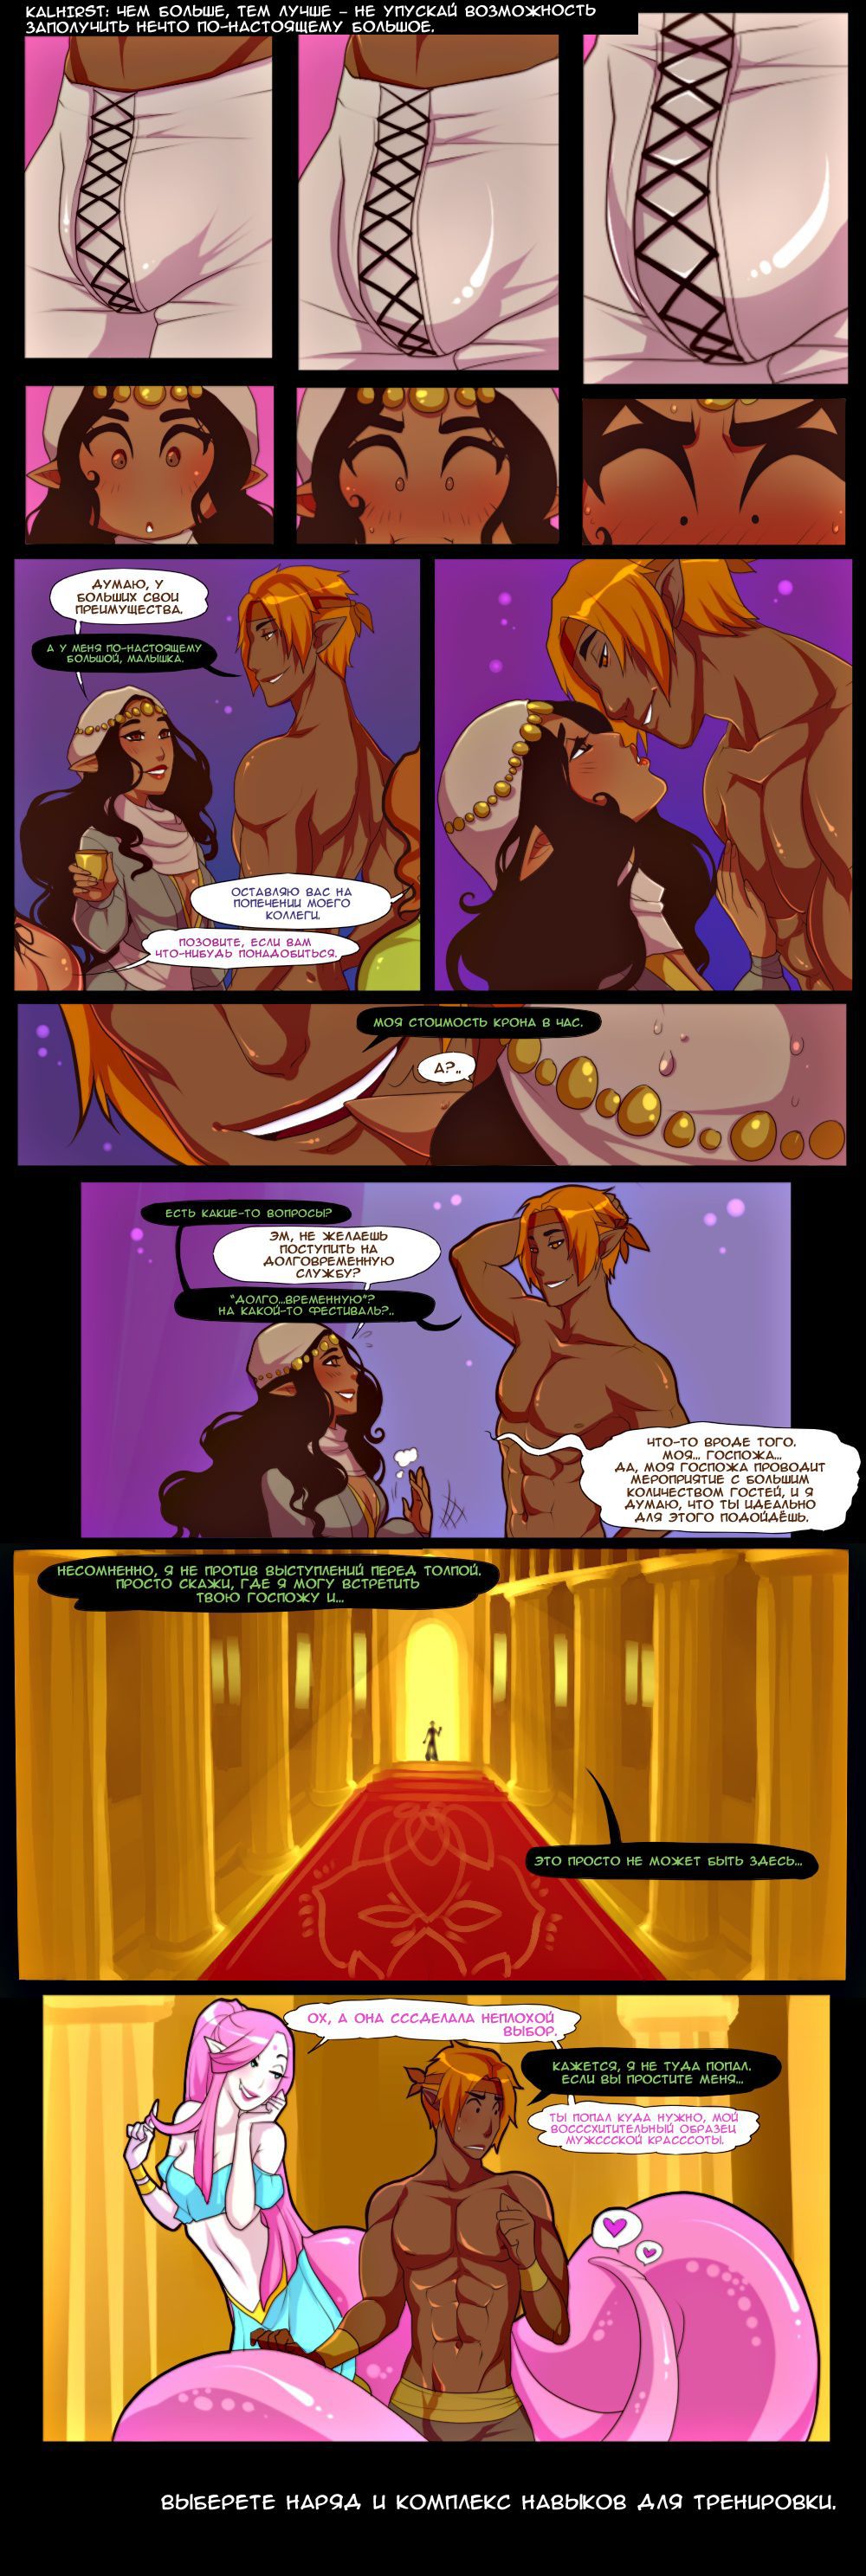 [Lunareth] Queen of Butts [Russian] (Ongoing) 39